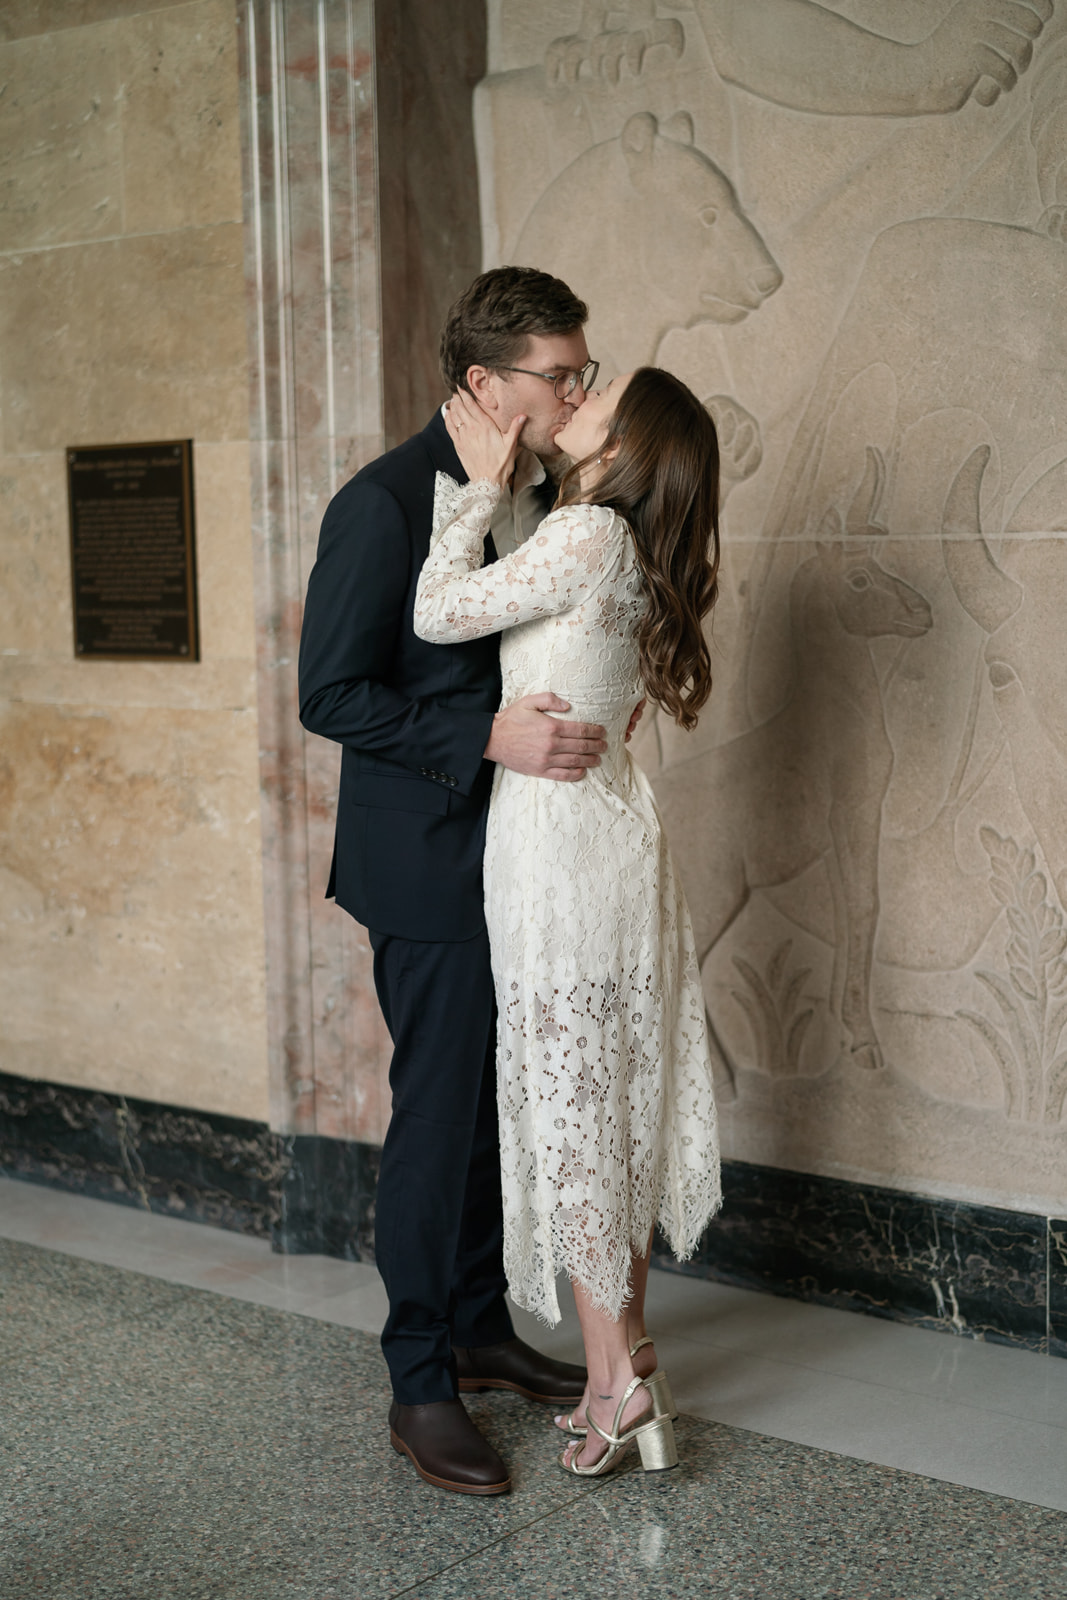 An intimate elopement at City Hall in Denver Colorado